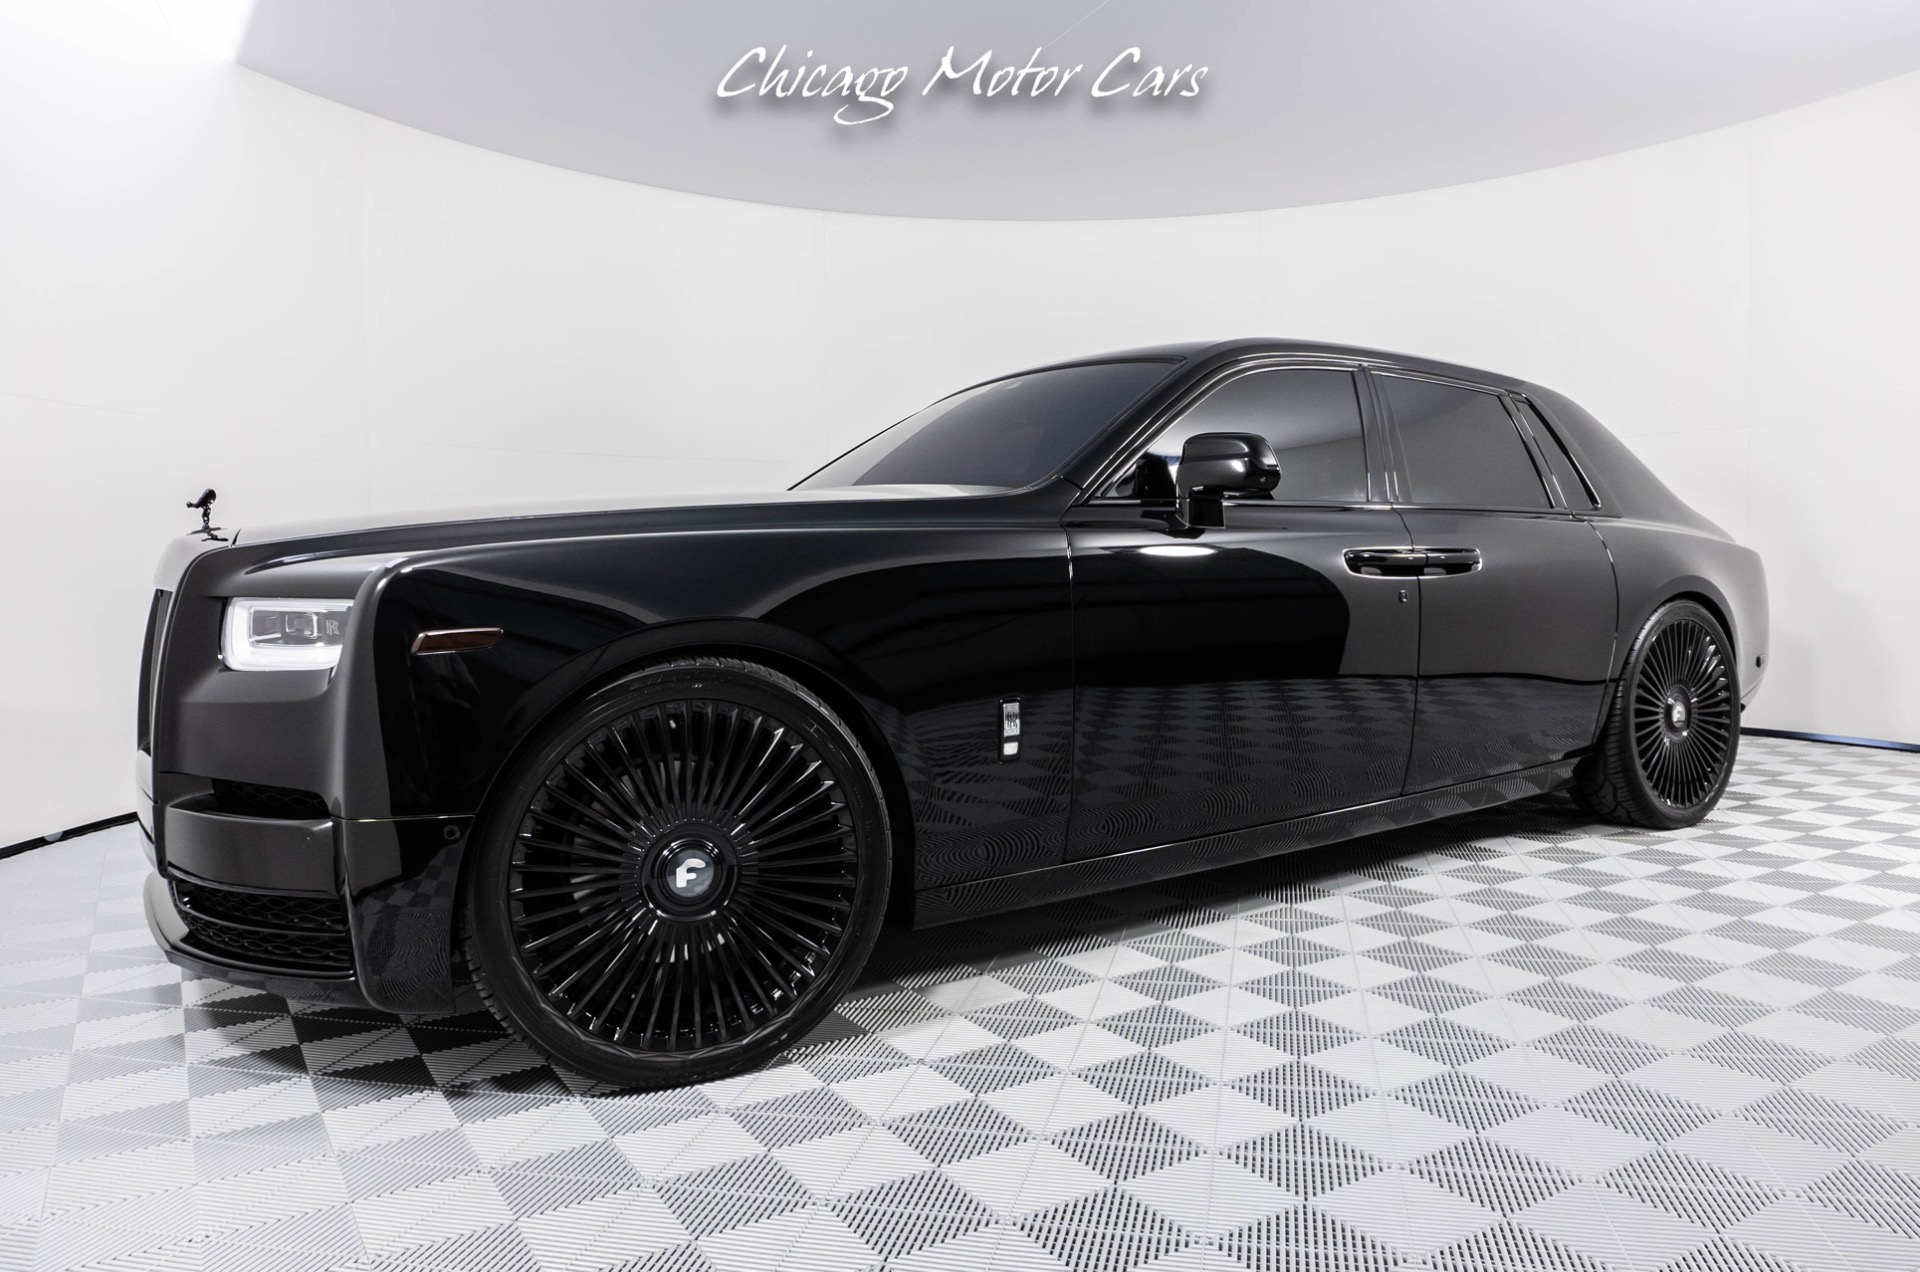 This RollsRoyce Phantoms interior features one million stitches  CNET